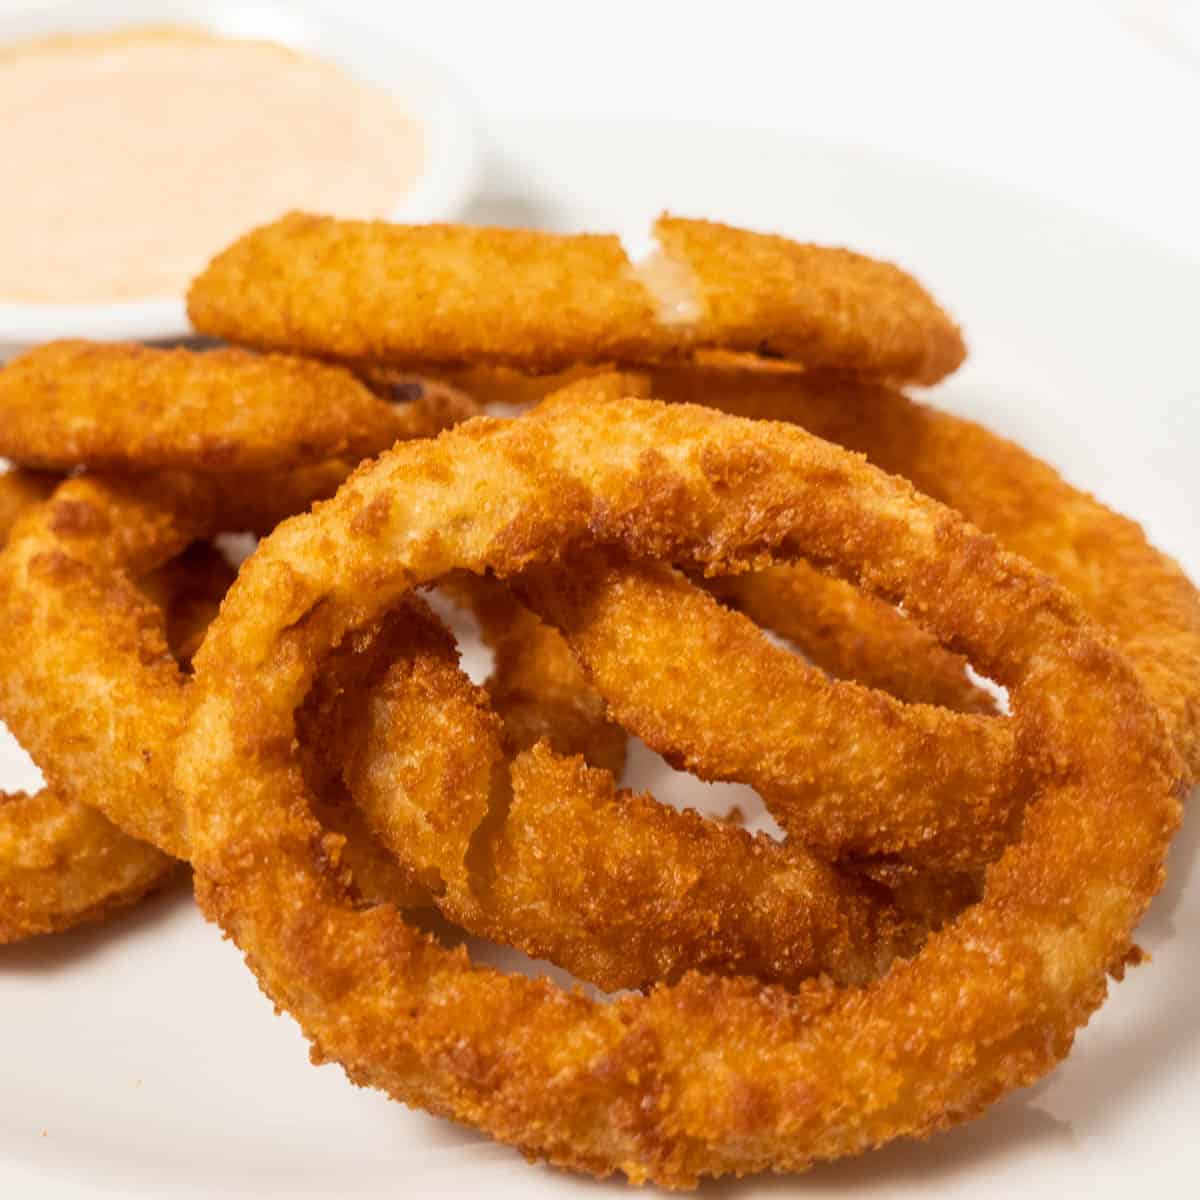 Frozen onion rings in the air fryer featured close up image